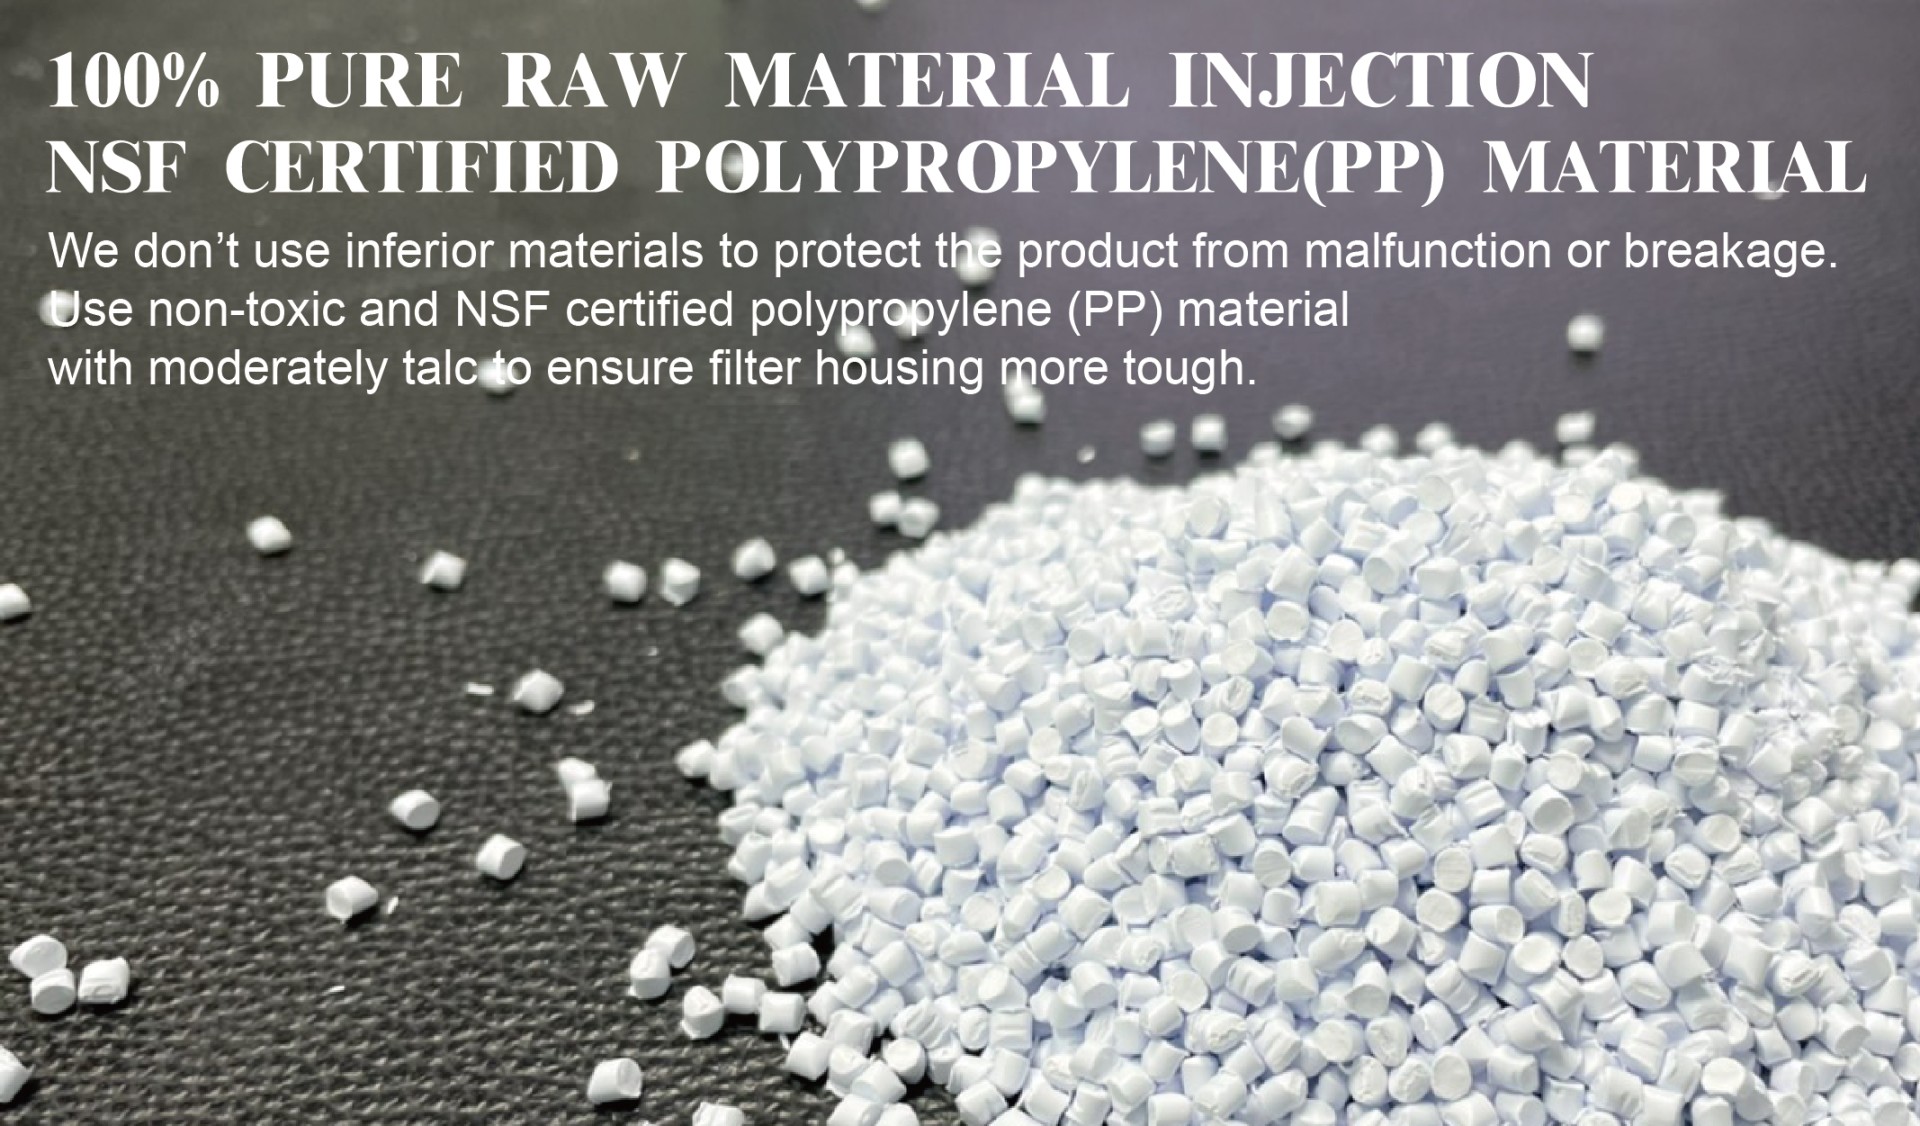 100% PURE RAW MATERIAL INJECTION NSF CERTIFIED POLYPROPYLENE(PP) MATERIAL